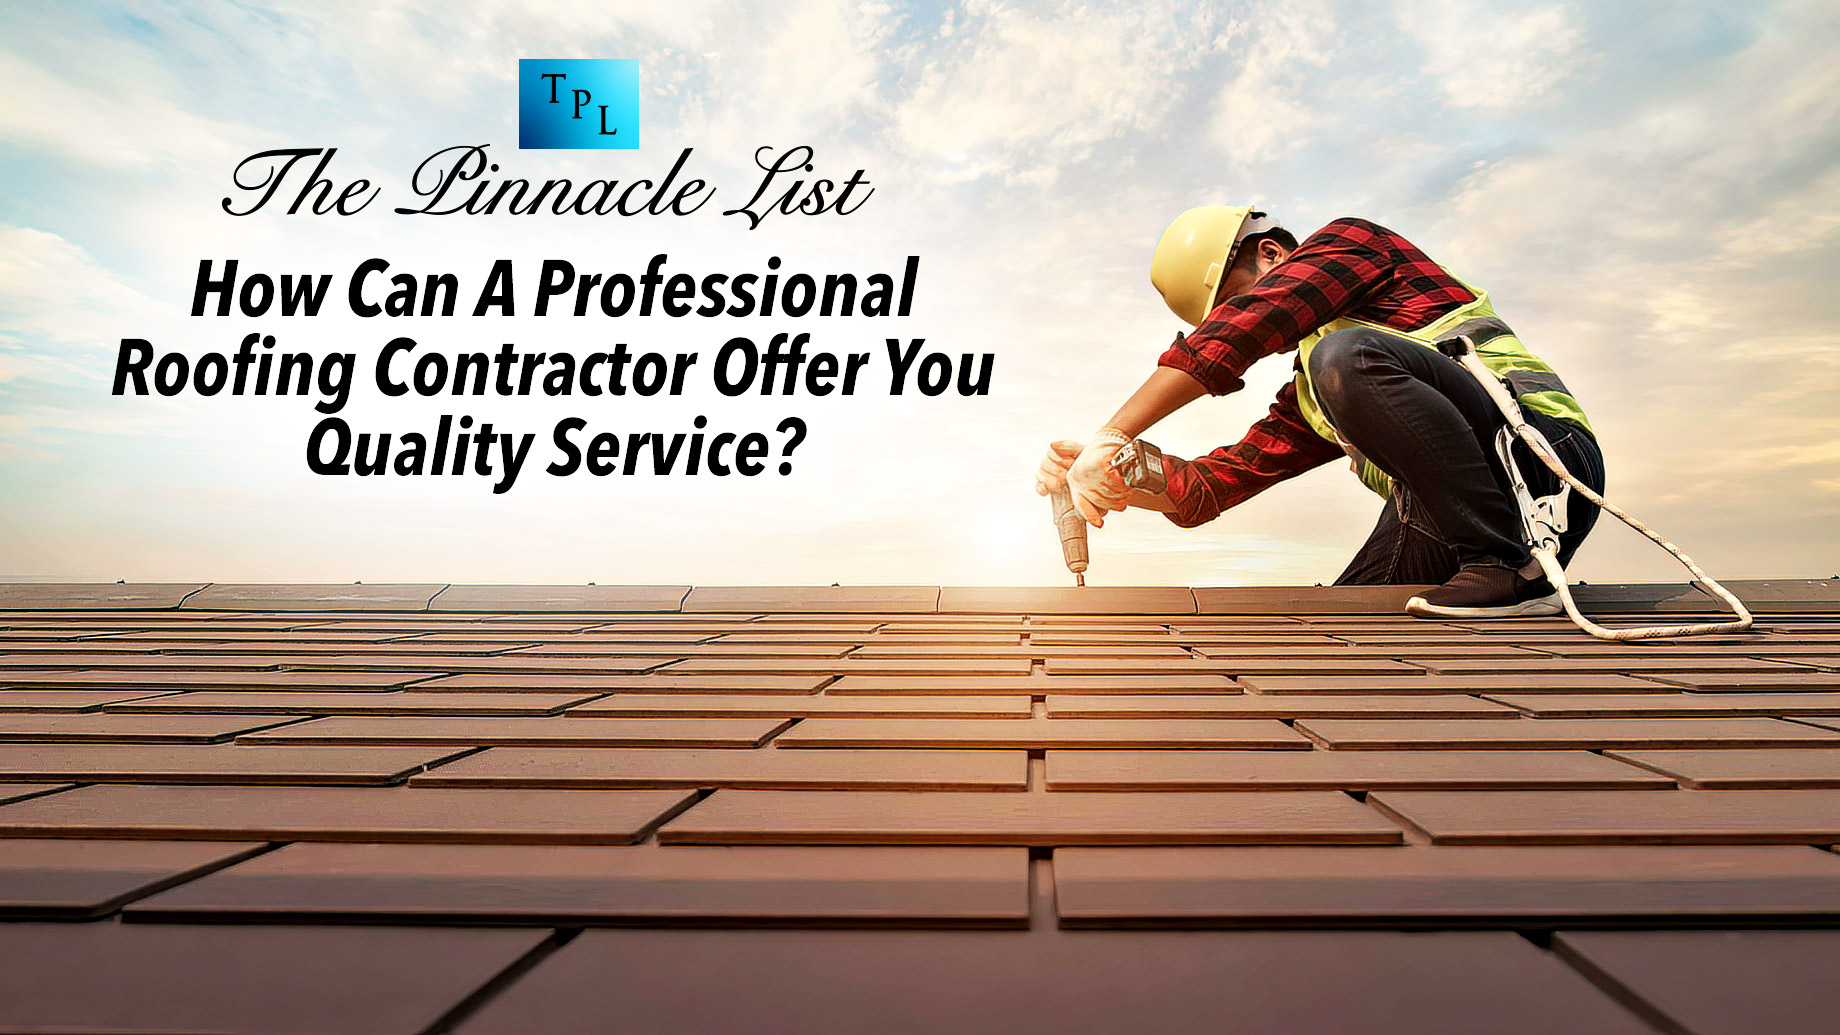 How Can A Professional Roofing Contractor Offer You Quality Service?